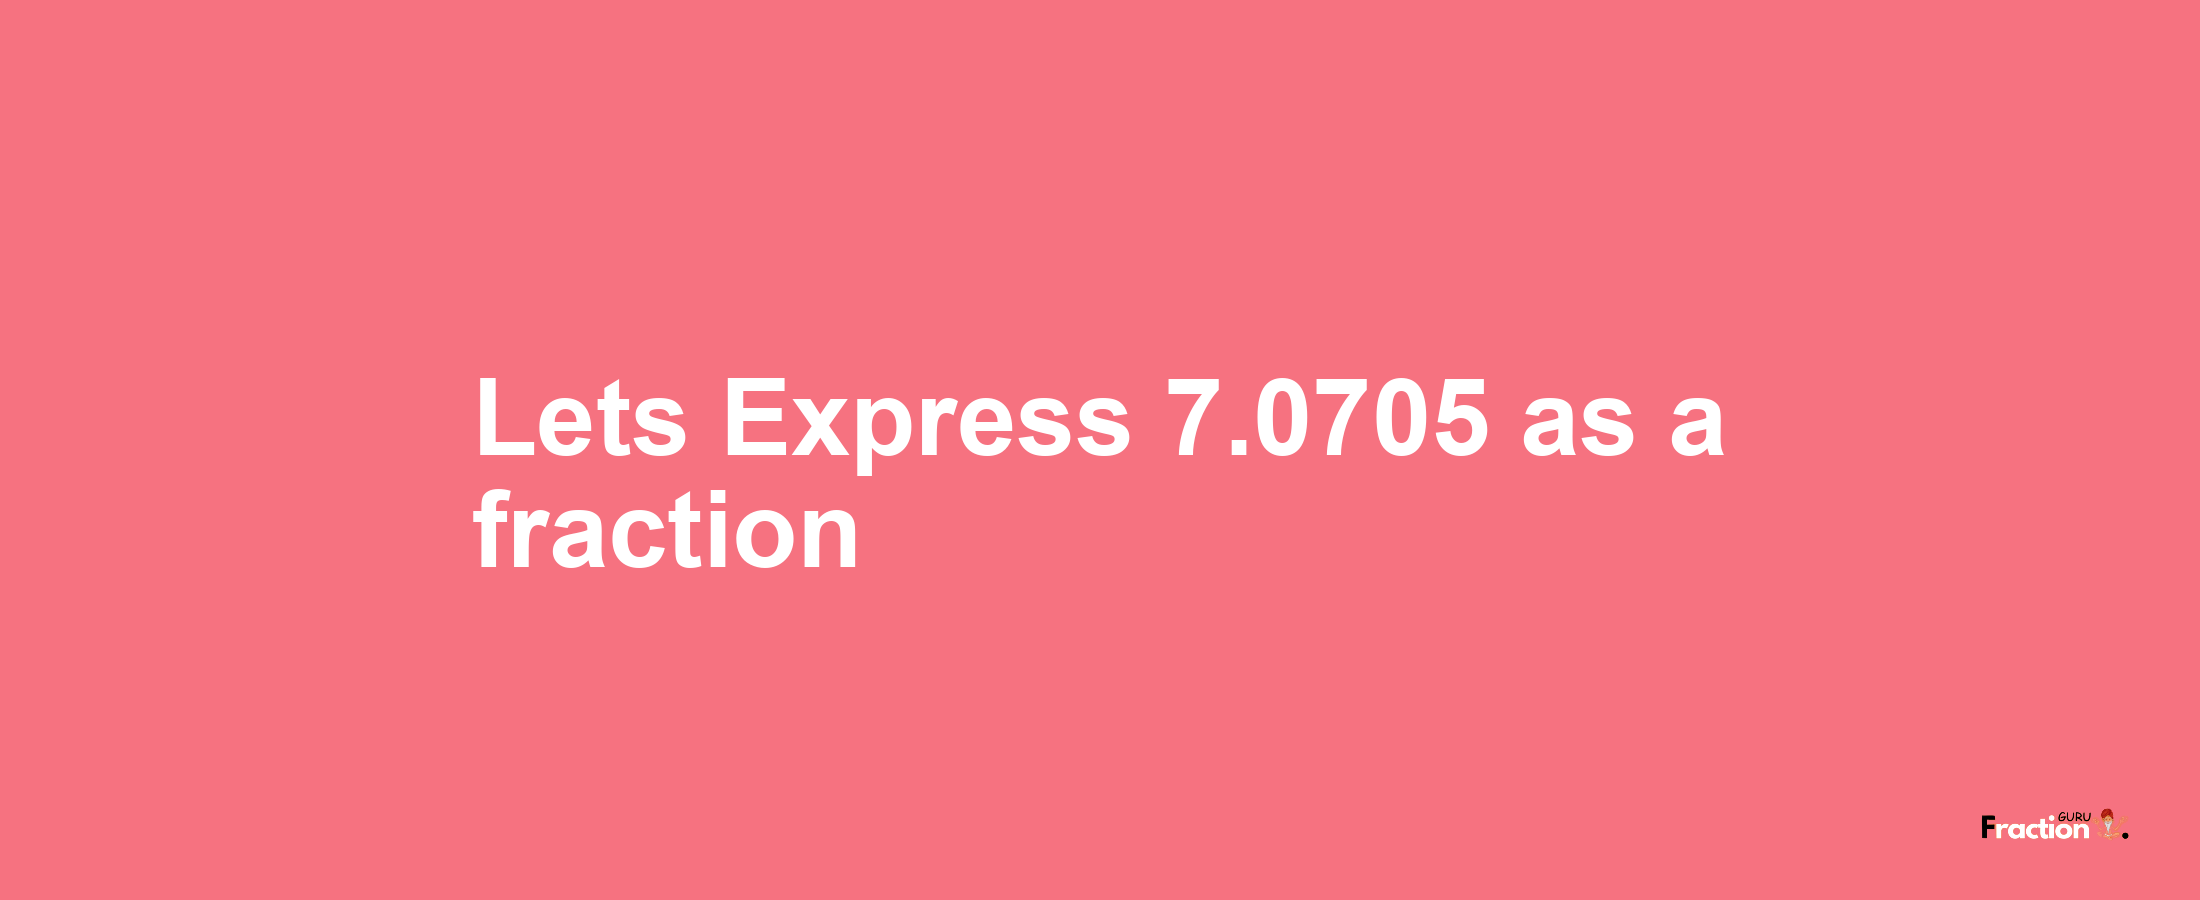 Lets Express 7.0705 as afraction